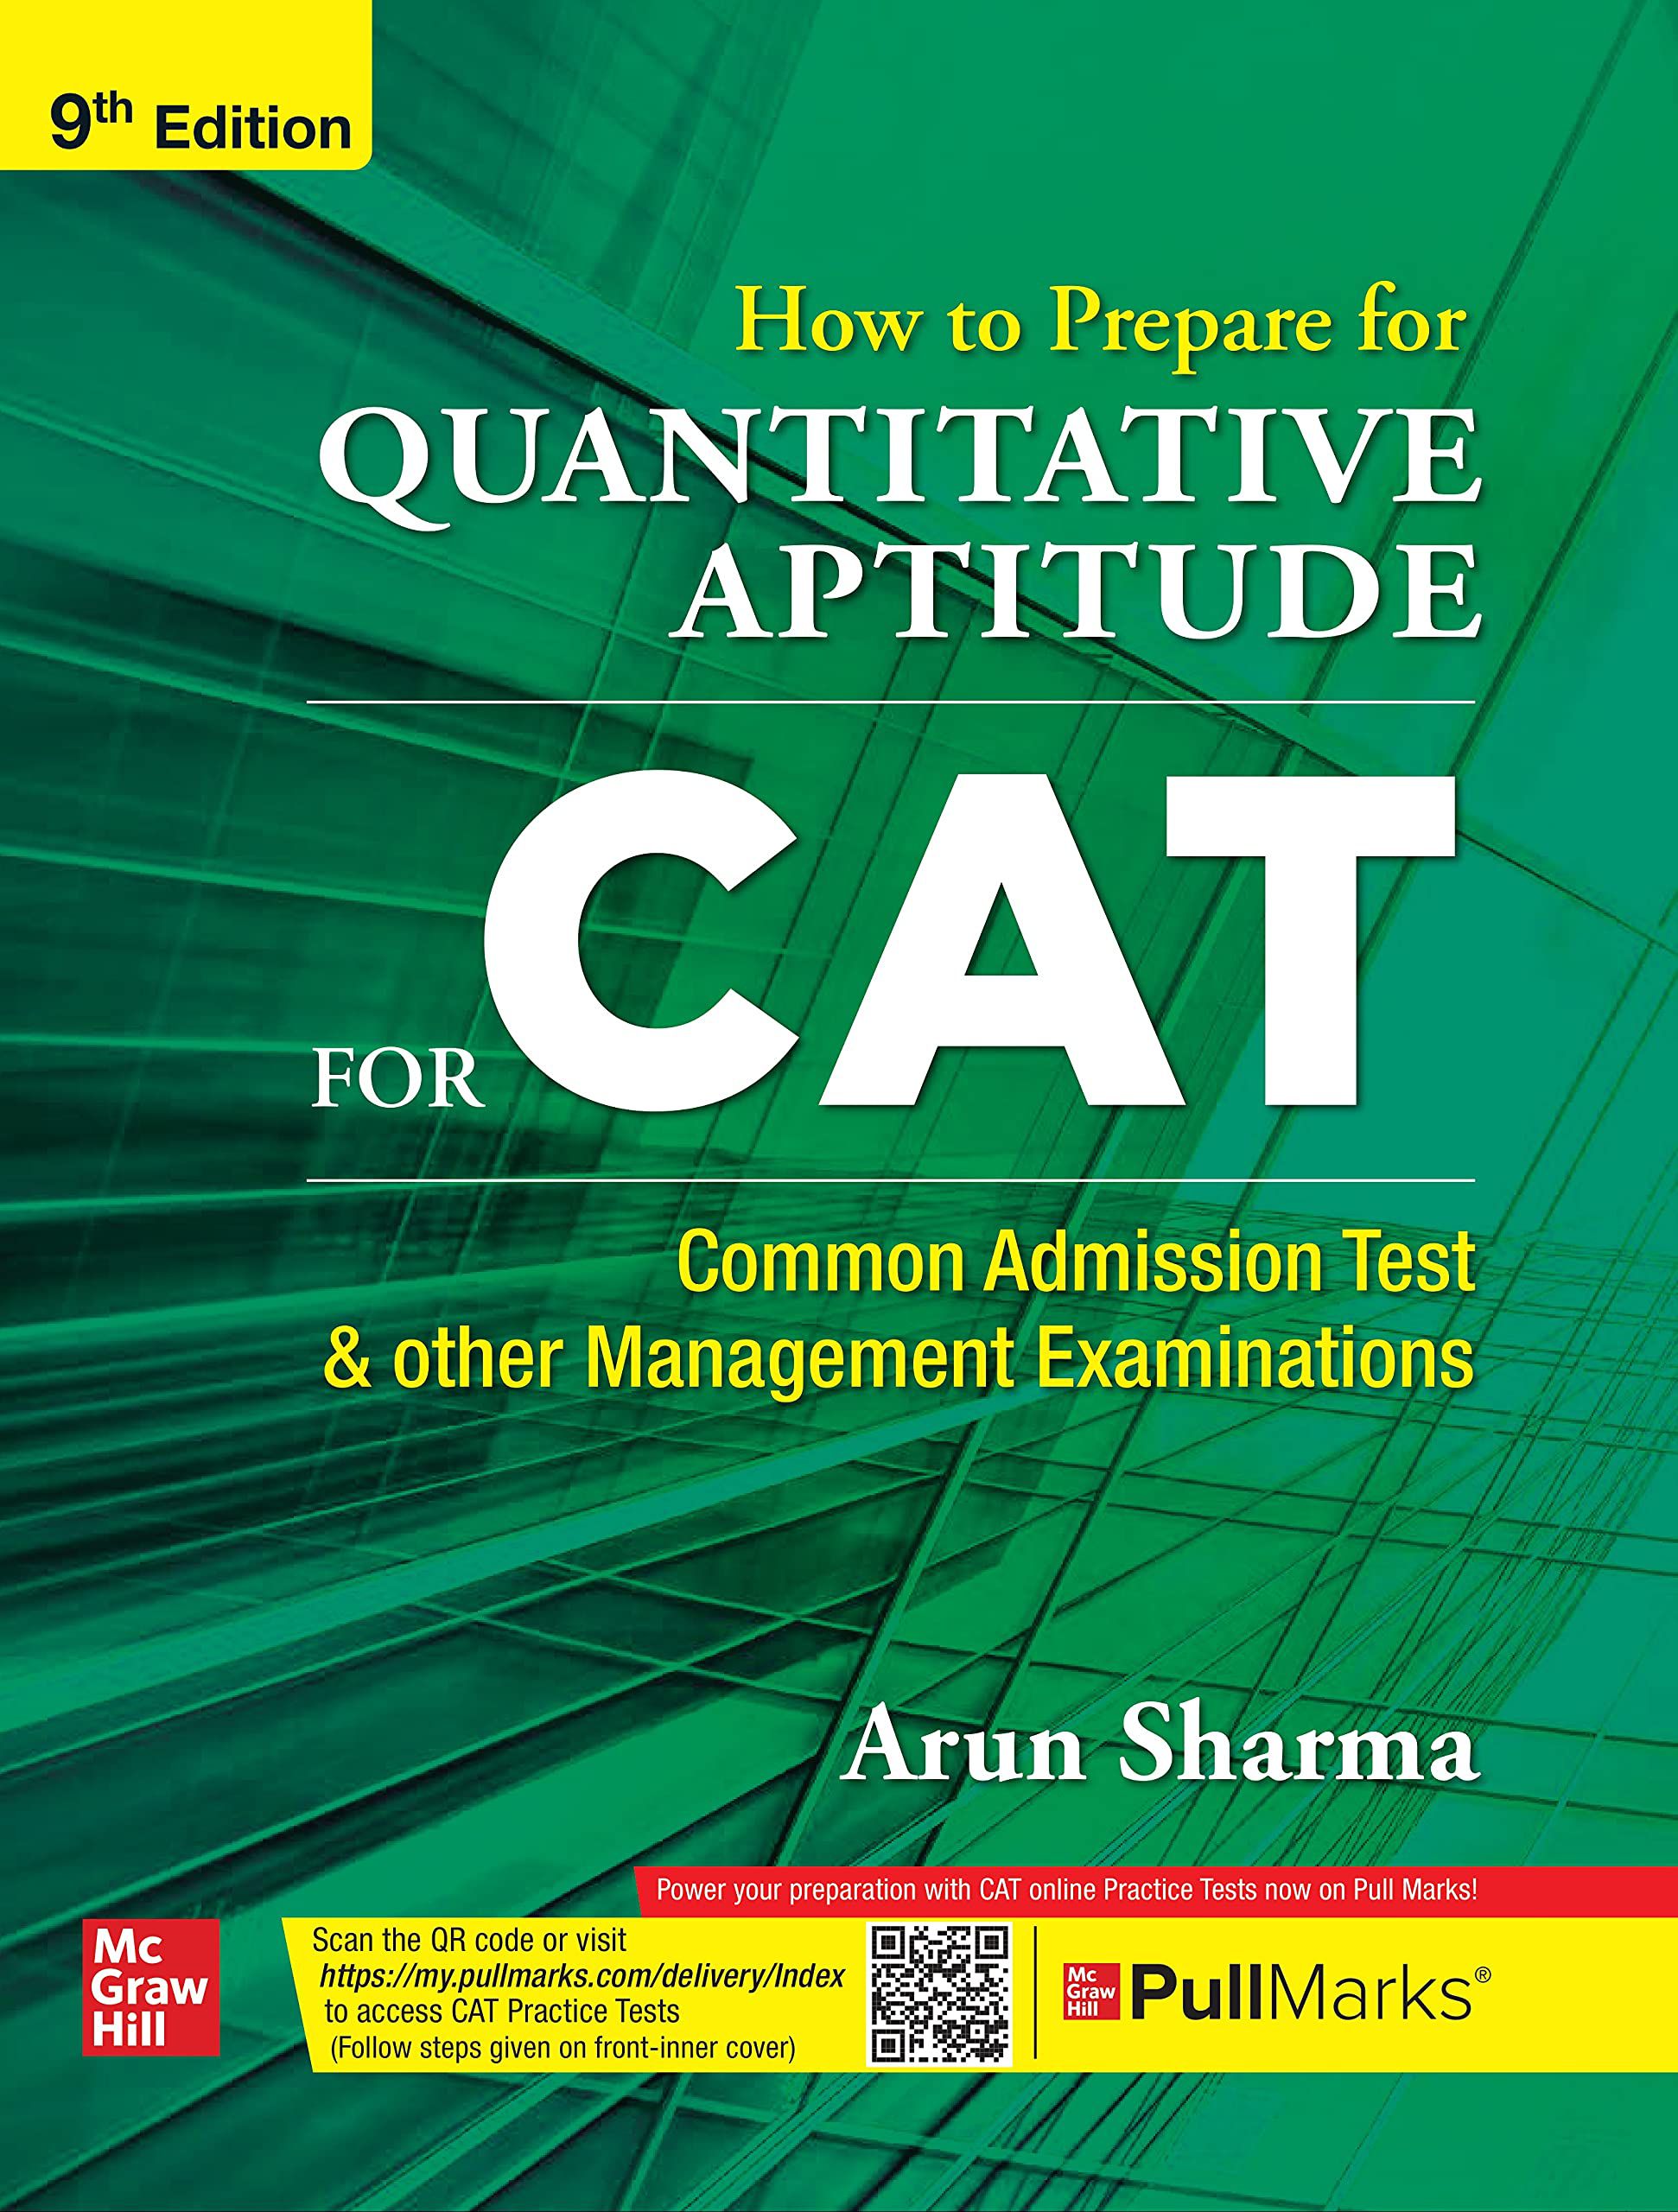 buy-how-to-prepare-for-quantitative-aptitude-for-cat-9th-edition-paperback-by-arun-sharma